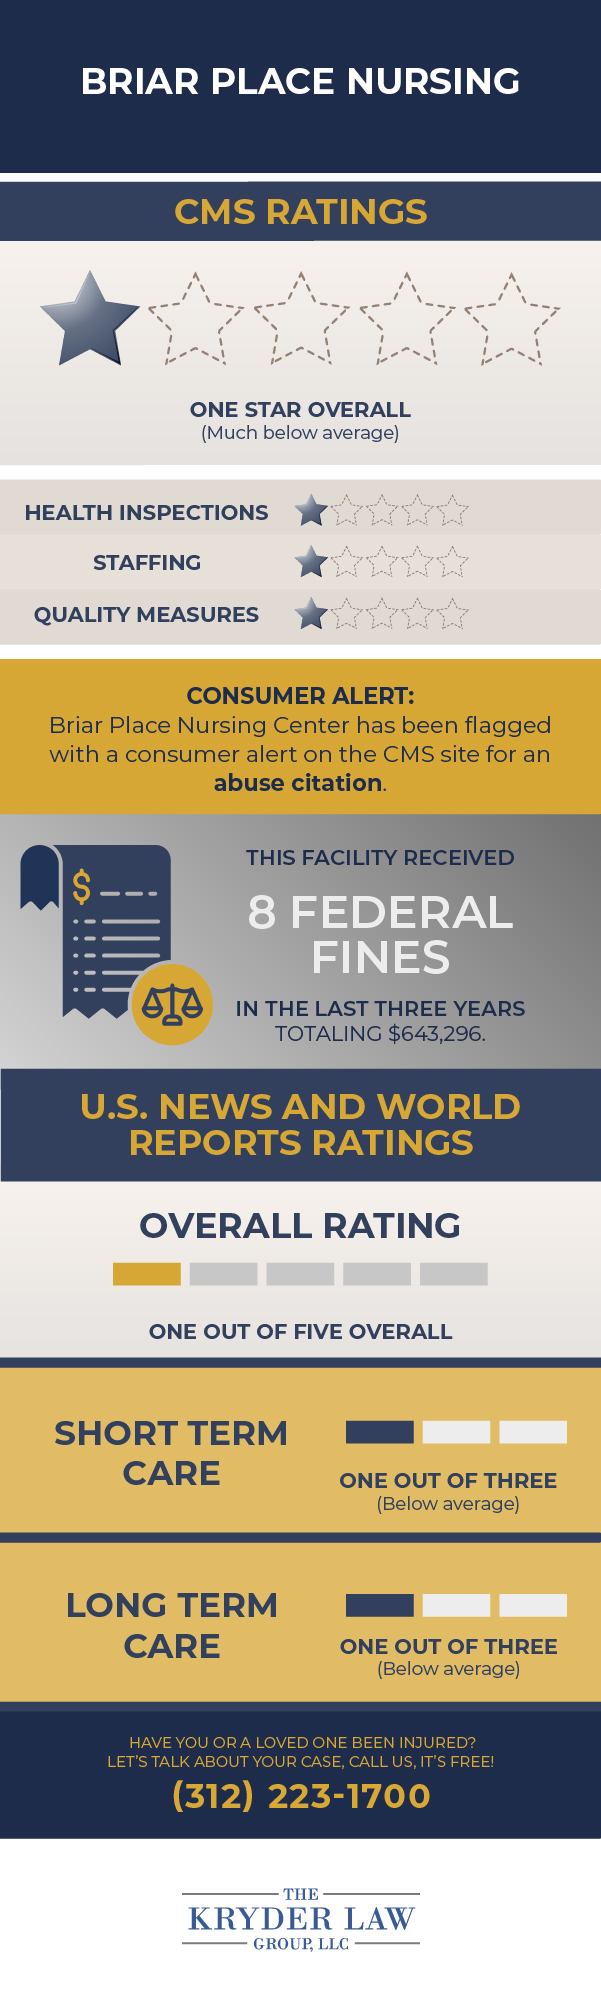 Briar Place Nursing CMS Ratings and U.S. News and World Reports Ratings